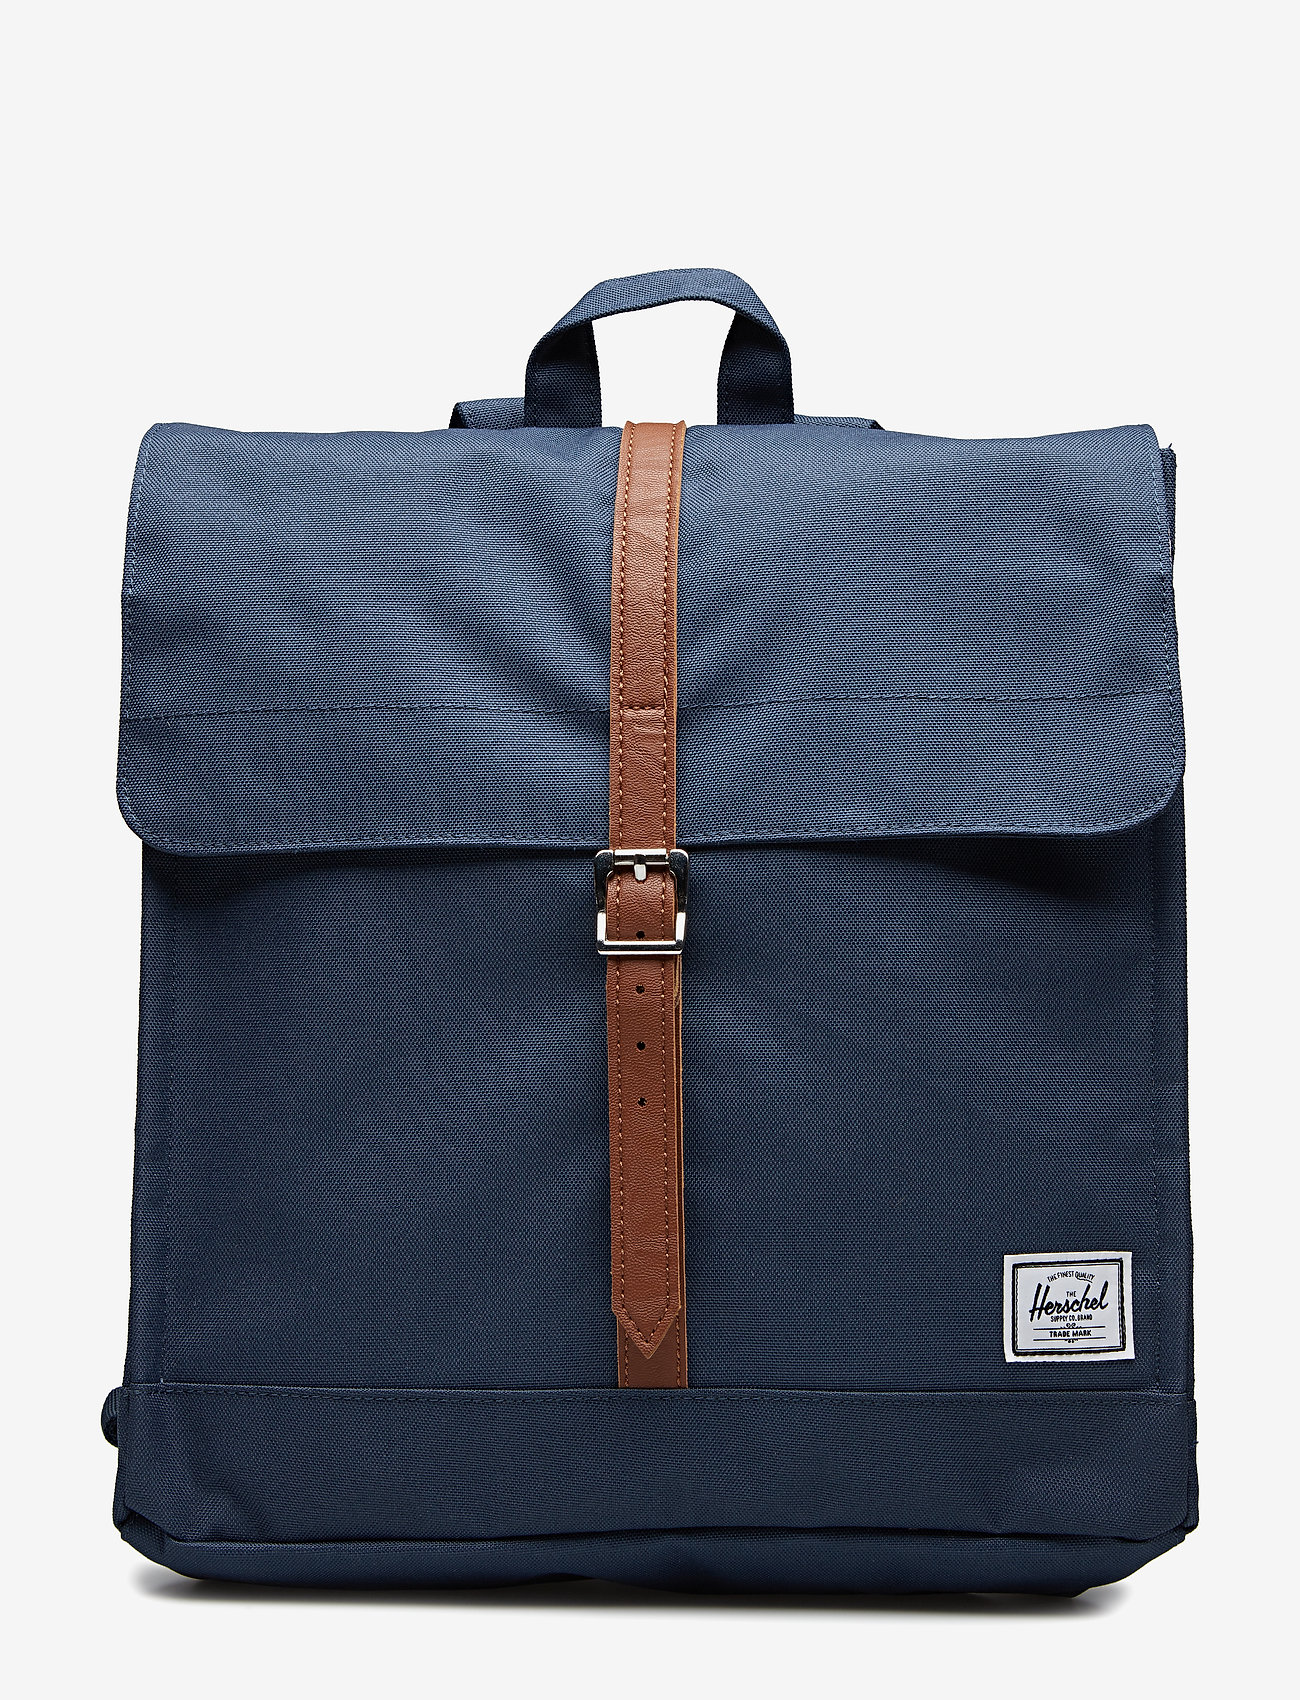 Herschel - City Mid Volume - bags - navy/tan synthetic leather - 0